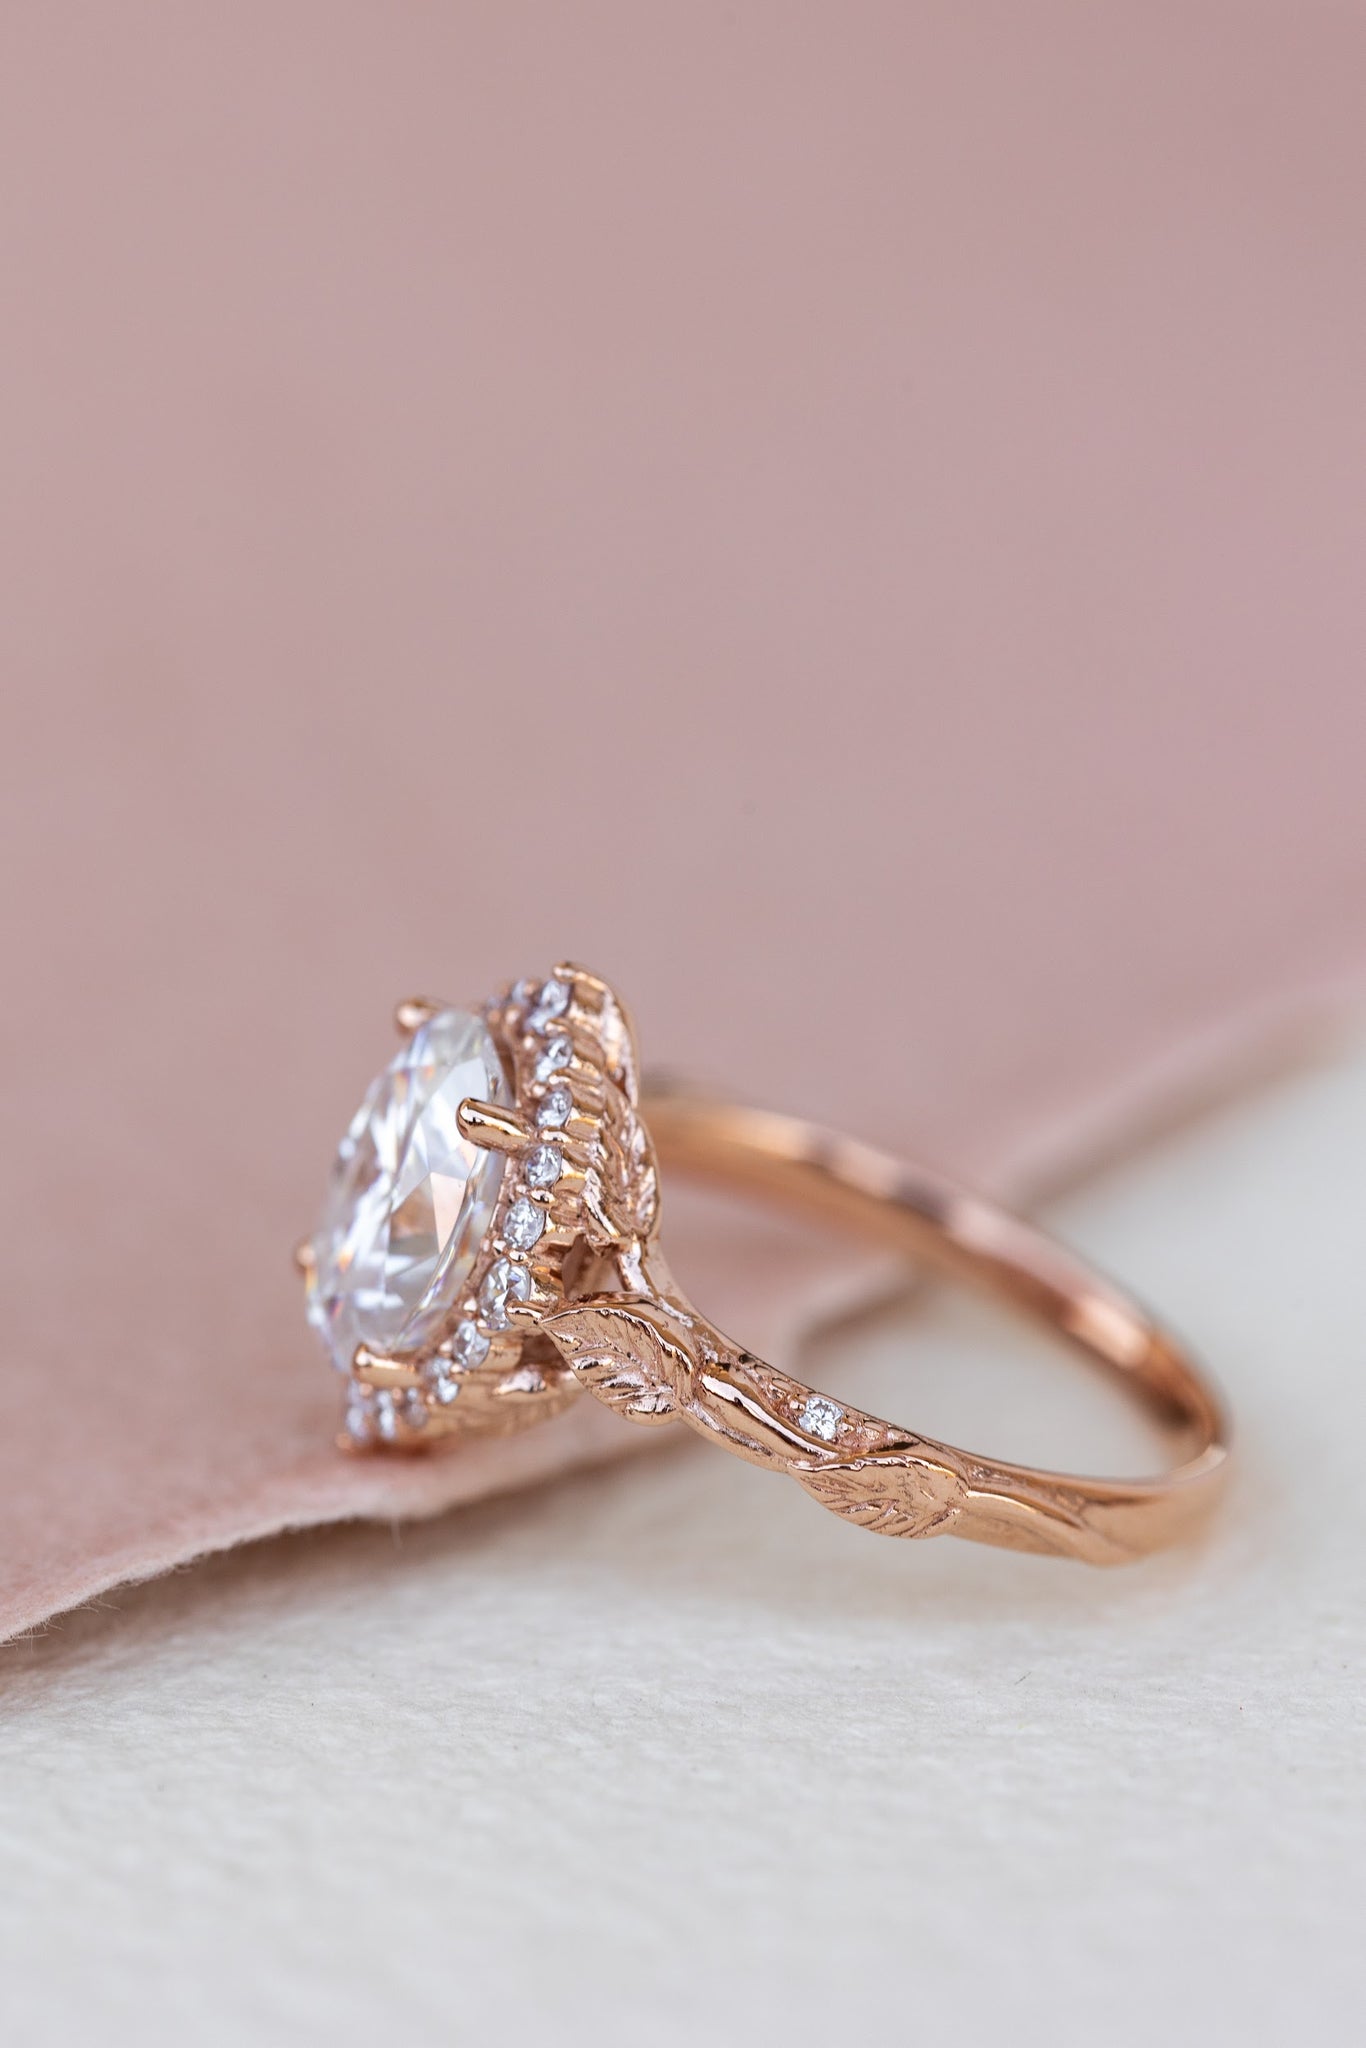 Sparkling moissanite engagement ring, nature themed proposal ring with diamond halo / Florentina - Eden Garden Jewelry™